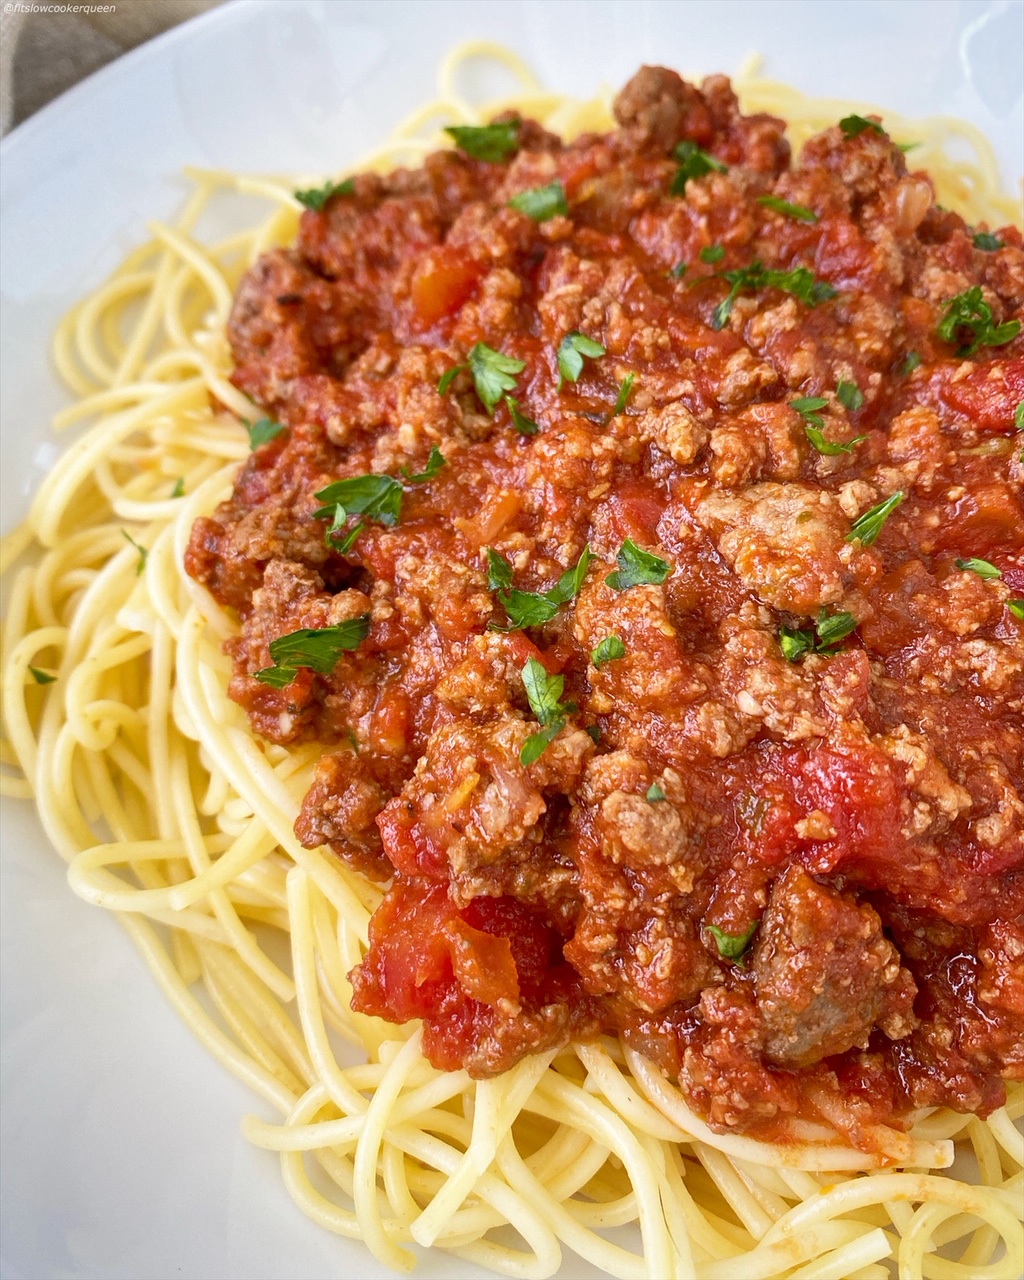 meat sauce over spaghetti noodles in a white bowl